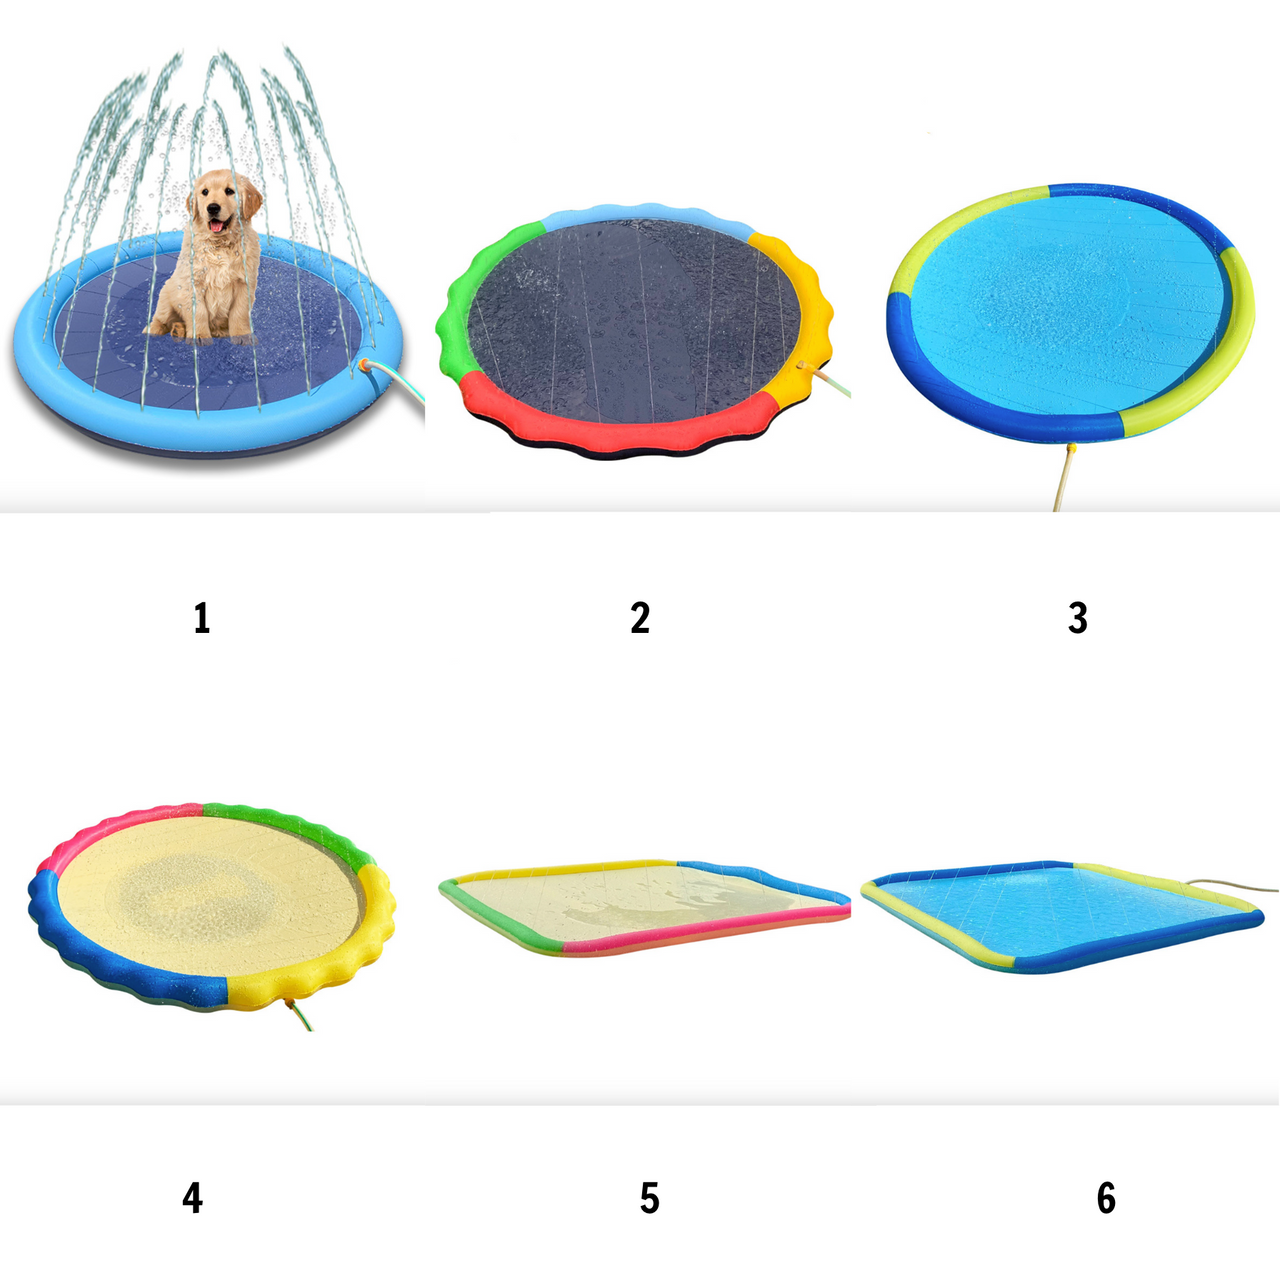 Cross-border Water Play Mat Dog Dog Toy: A game mat with water spray feature, providing interactive fun for your furry friend JonxiFon